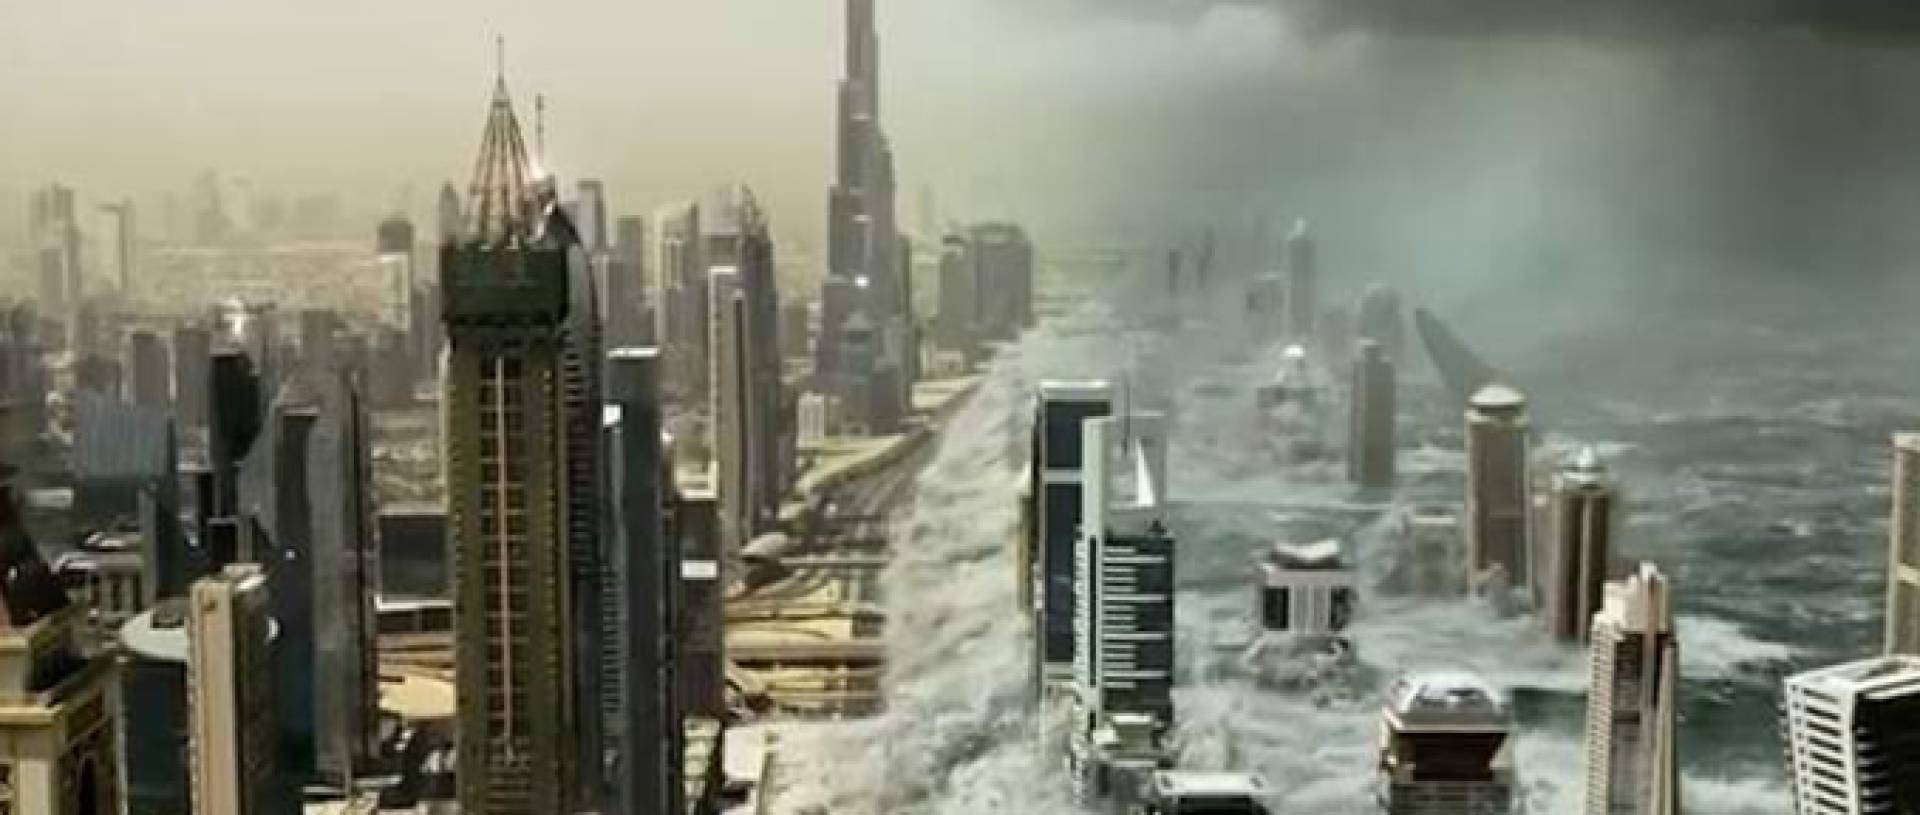 Geostorm Movie Review for Parents